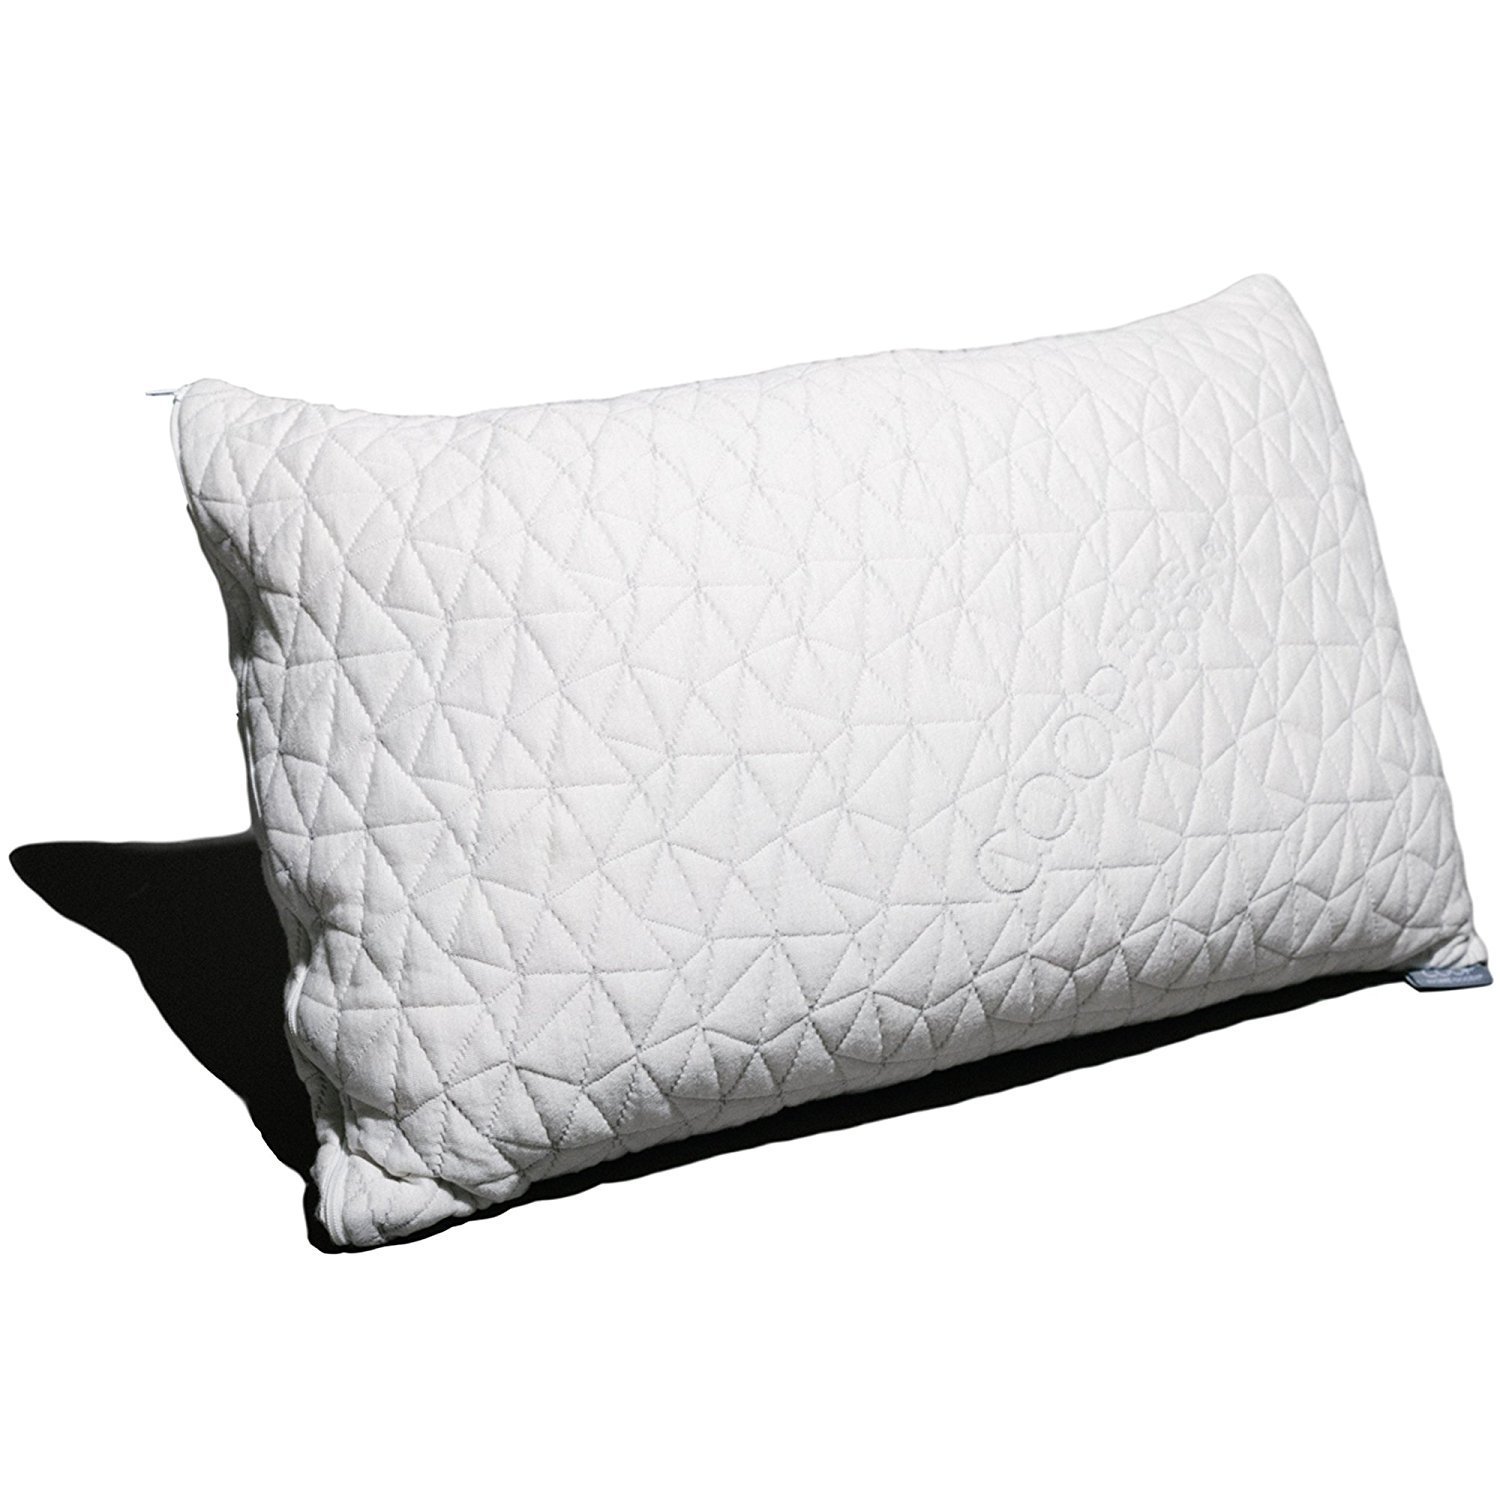 10 Best Pillows To Choose For A Good Night Sleep